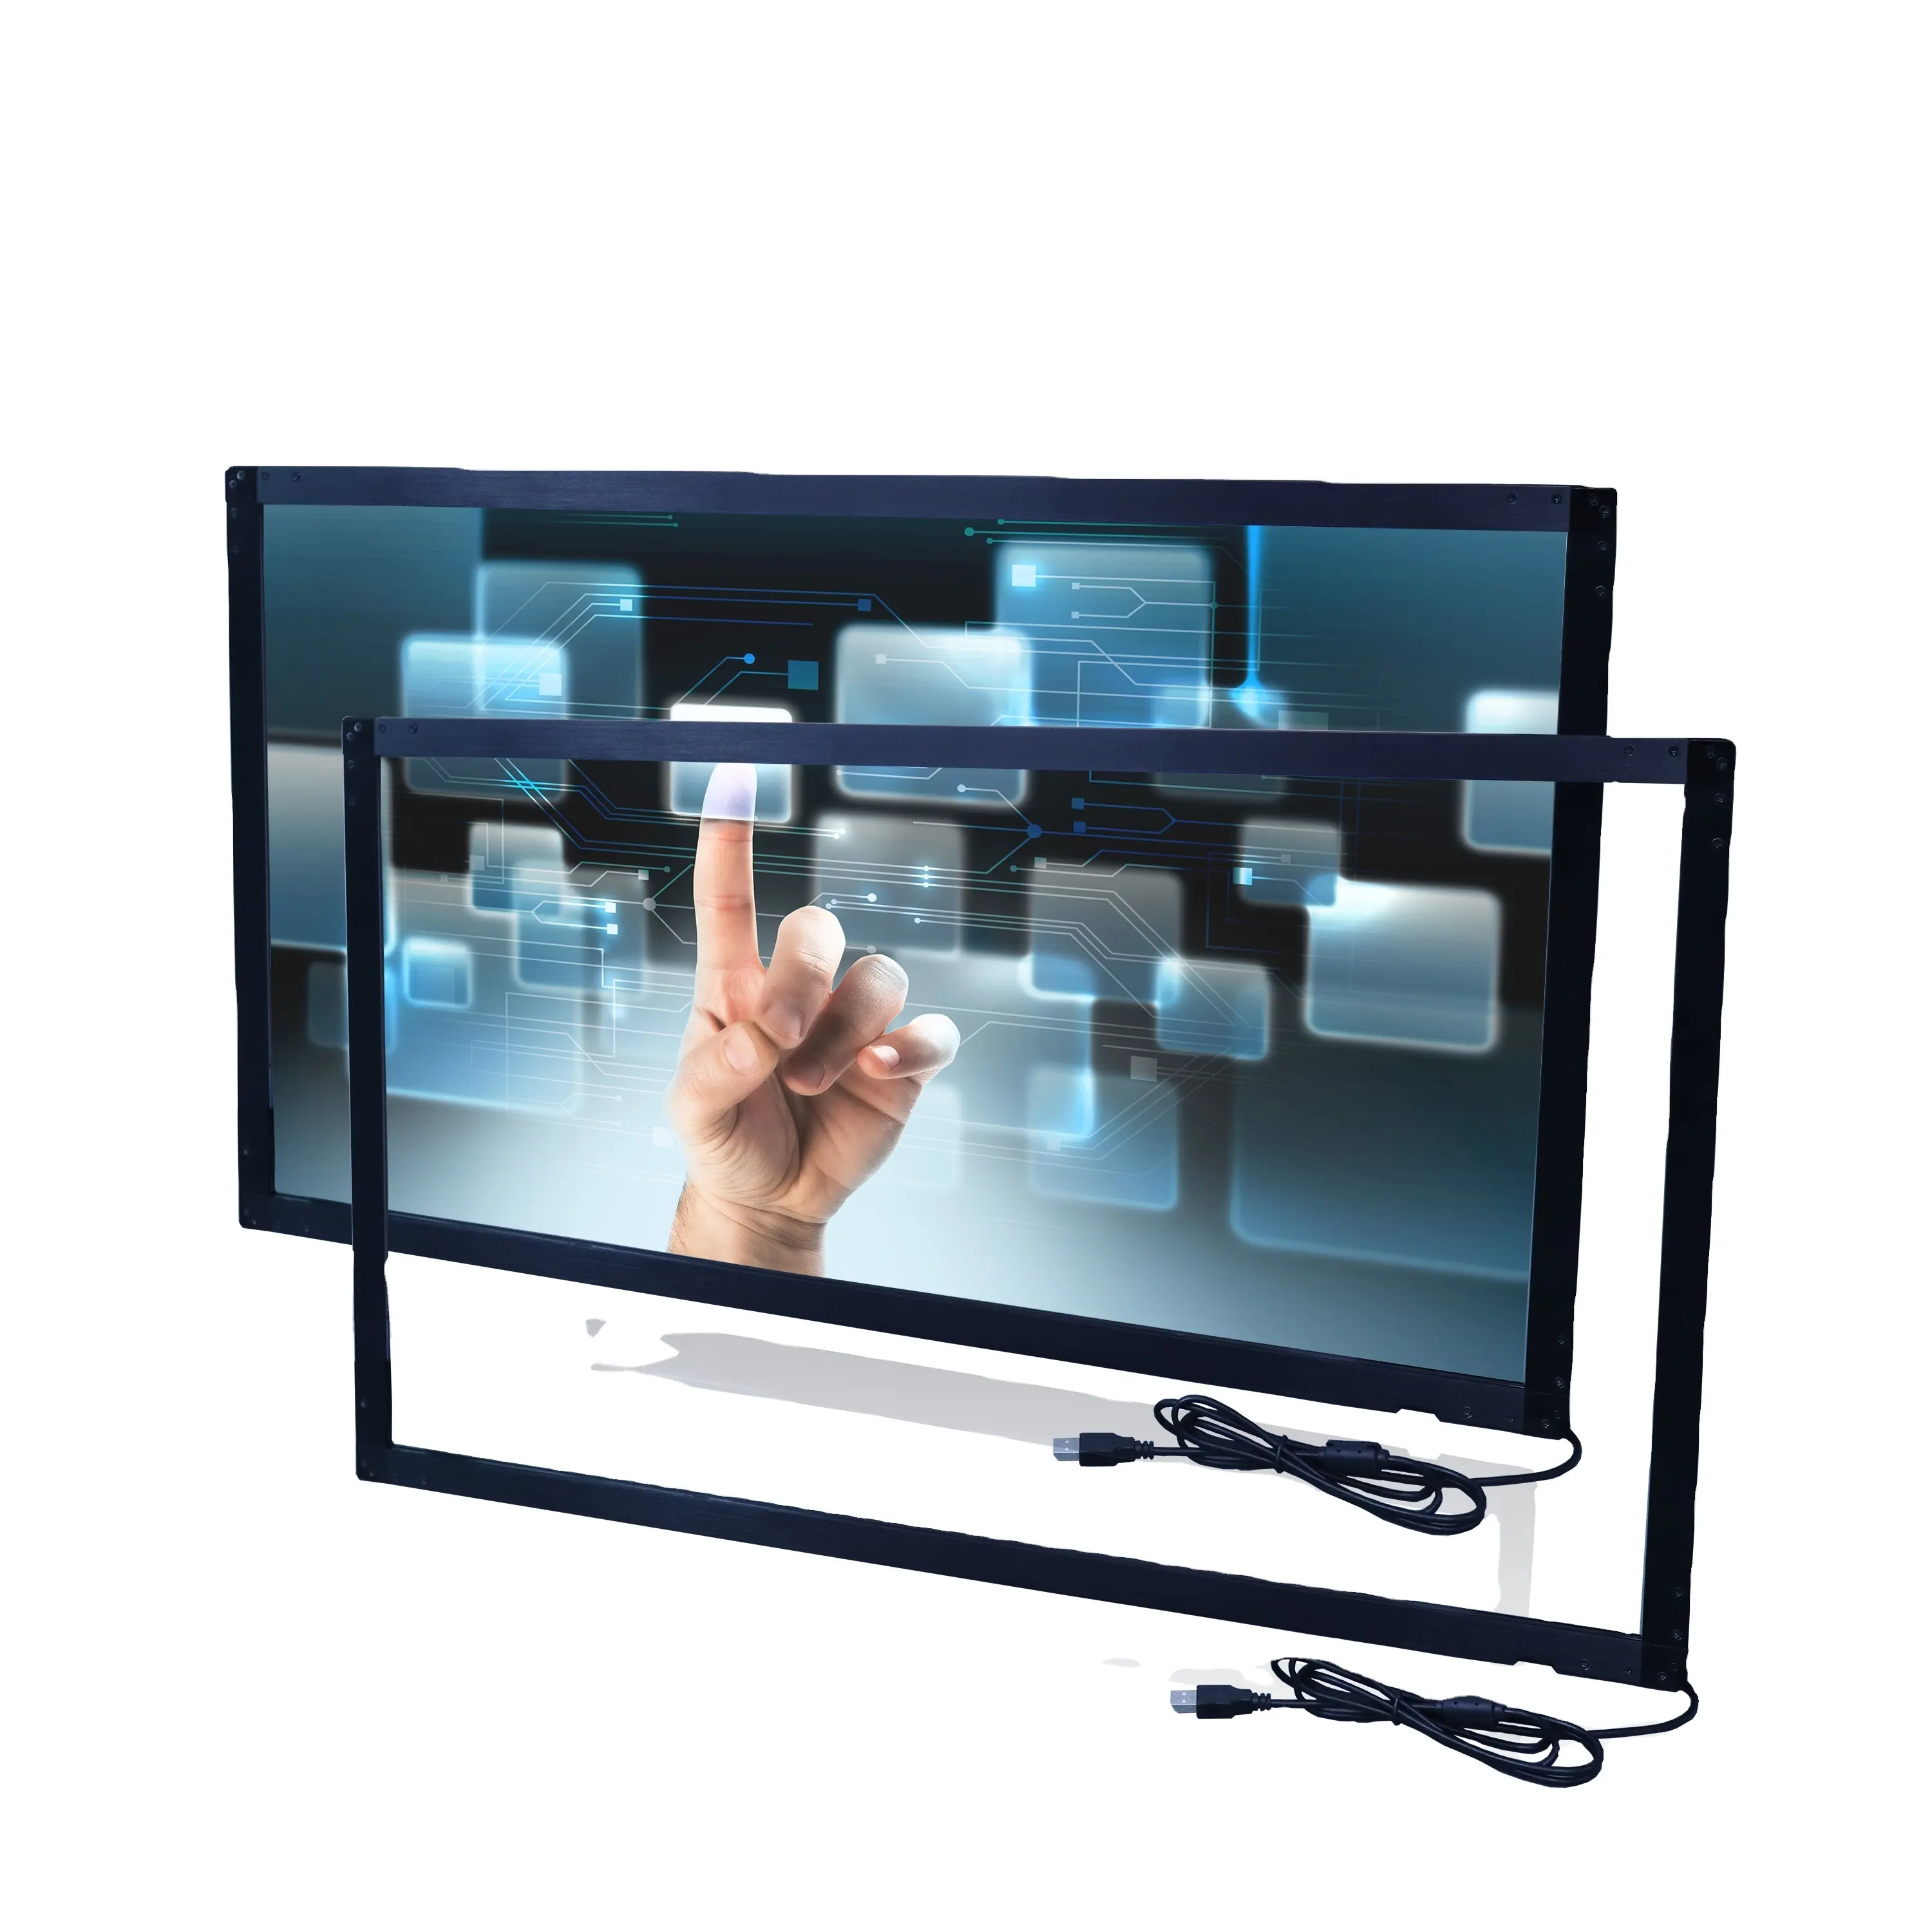 43-inch infrared touch screen frame, multi-touch display panel for LCD, Smart TV IR Touch frame overlay kit